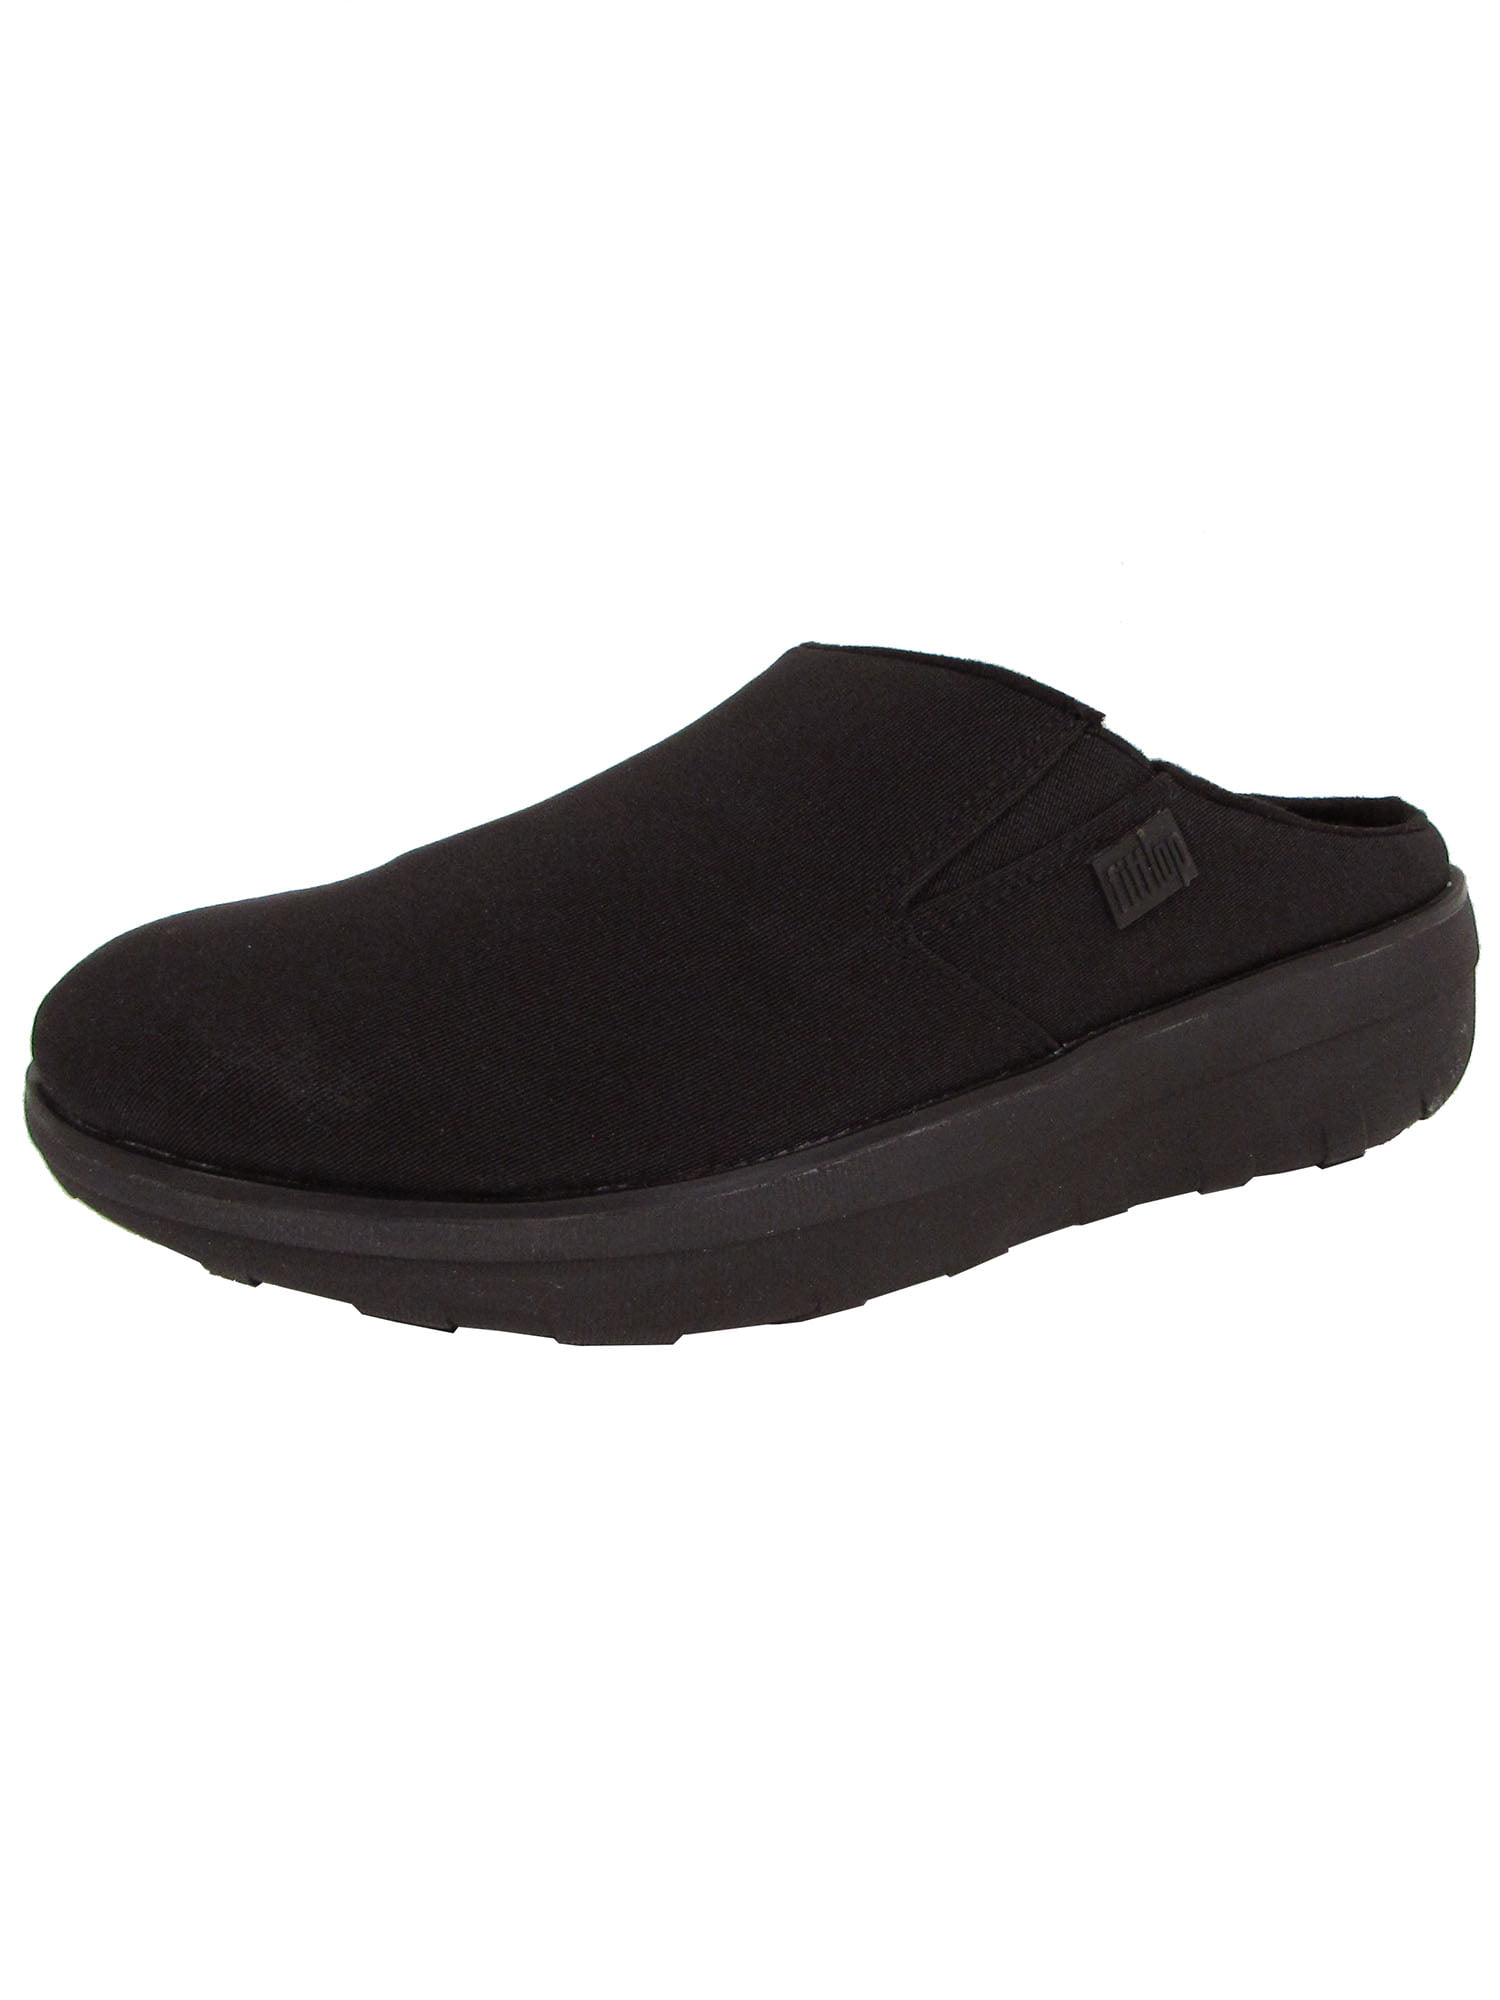 FitFlop - Fitflop Womens Loaff Slip On Clog Shoes - Walmart.com ...